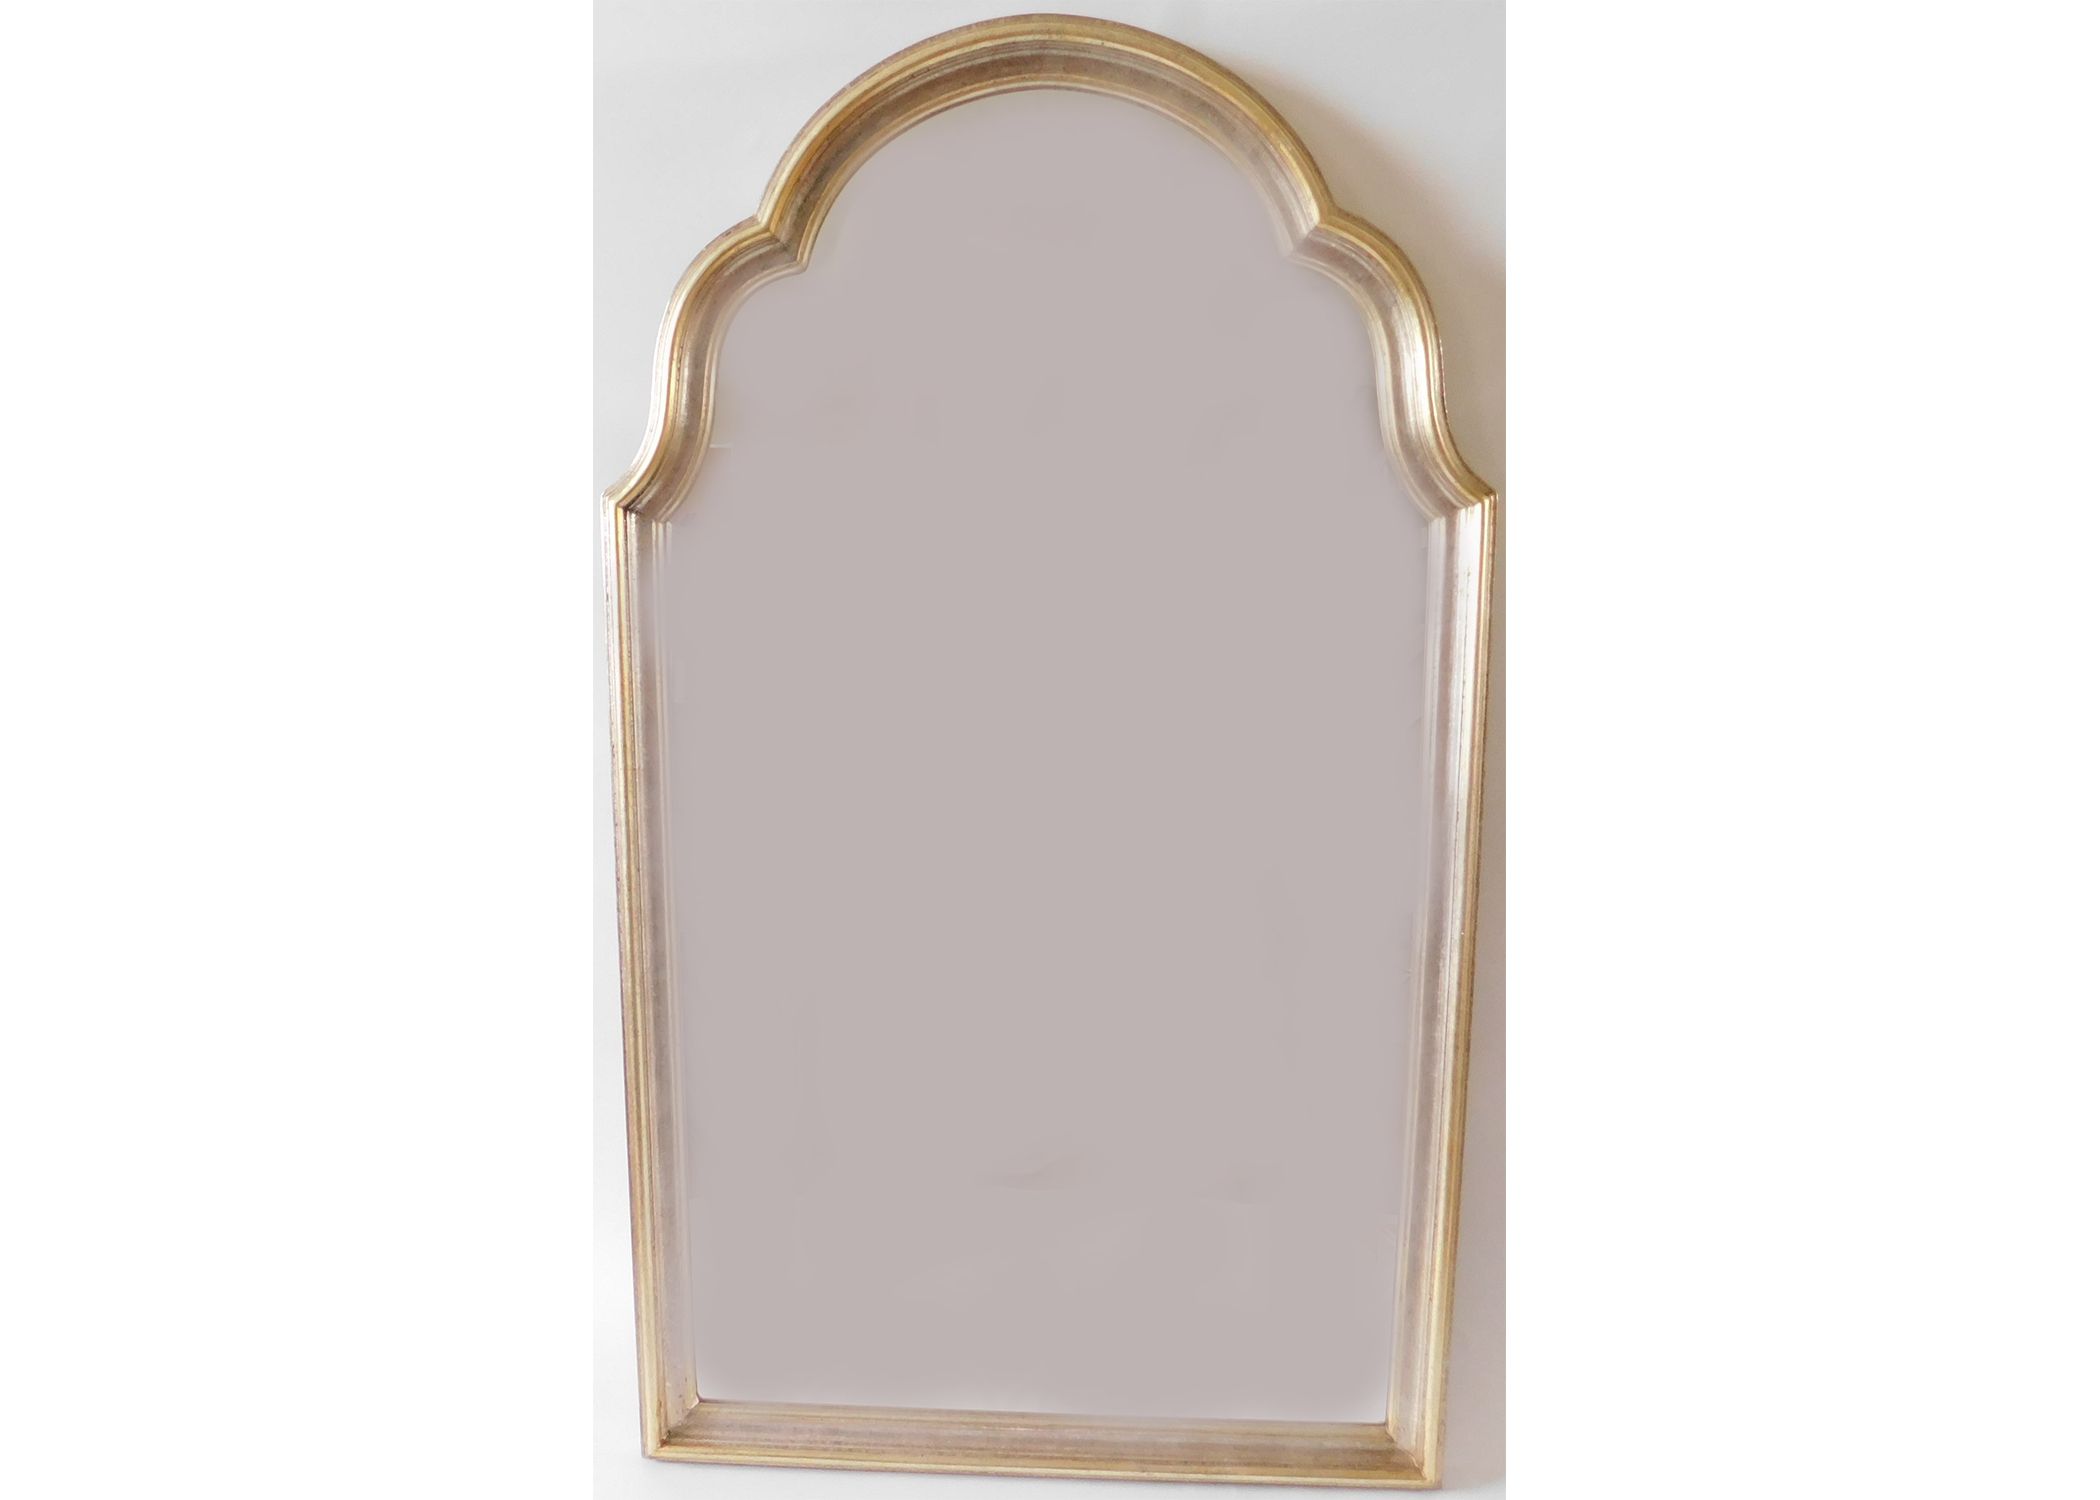 Fabulous Vintage Gold And Silver Leaf Hanging Wall Mirror This Vintage Pertaining To Silver Metal Cut Edge Wall Mirrors (View 10 of 15)